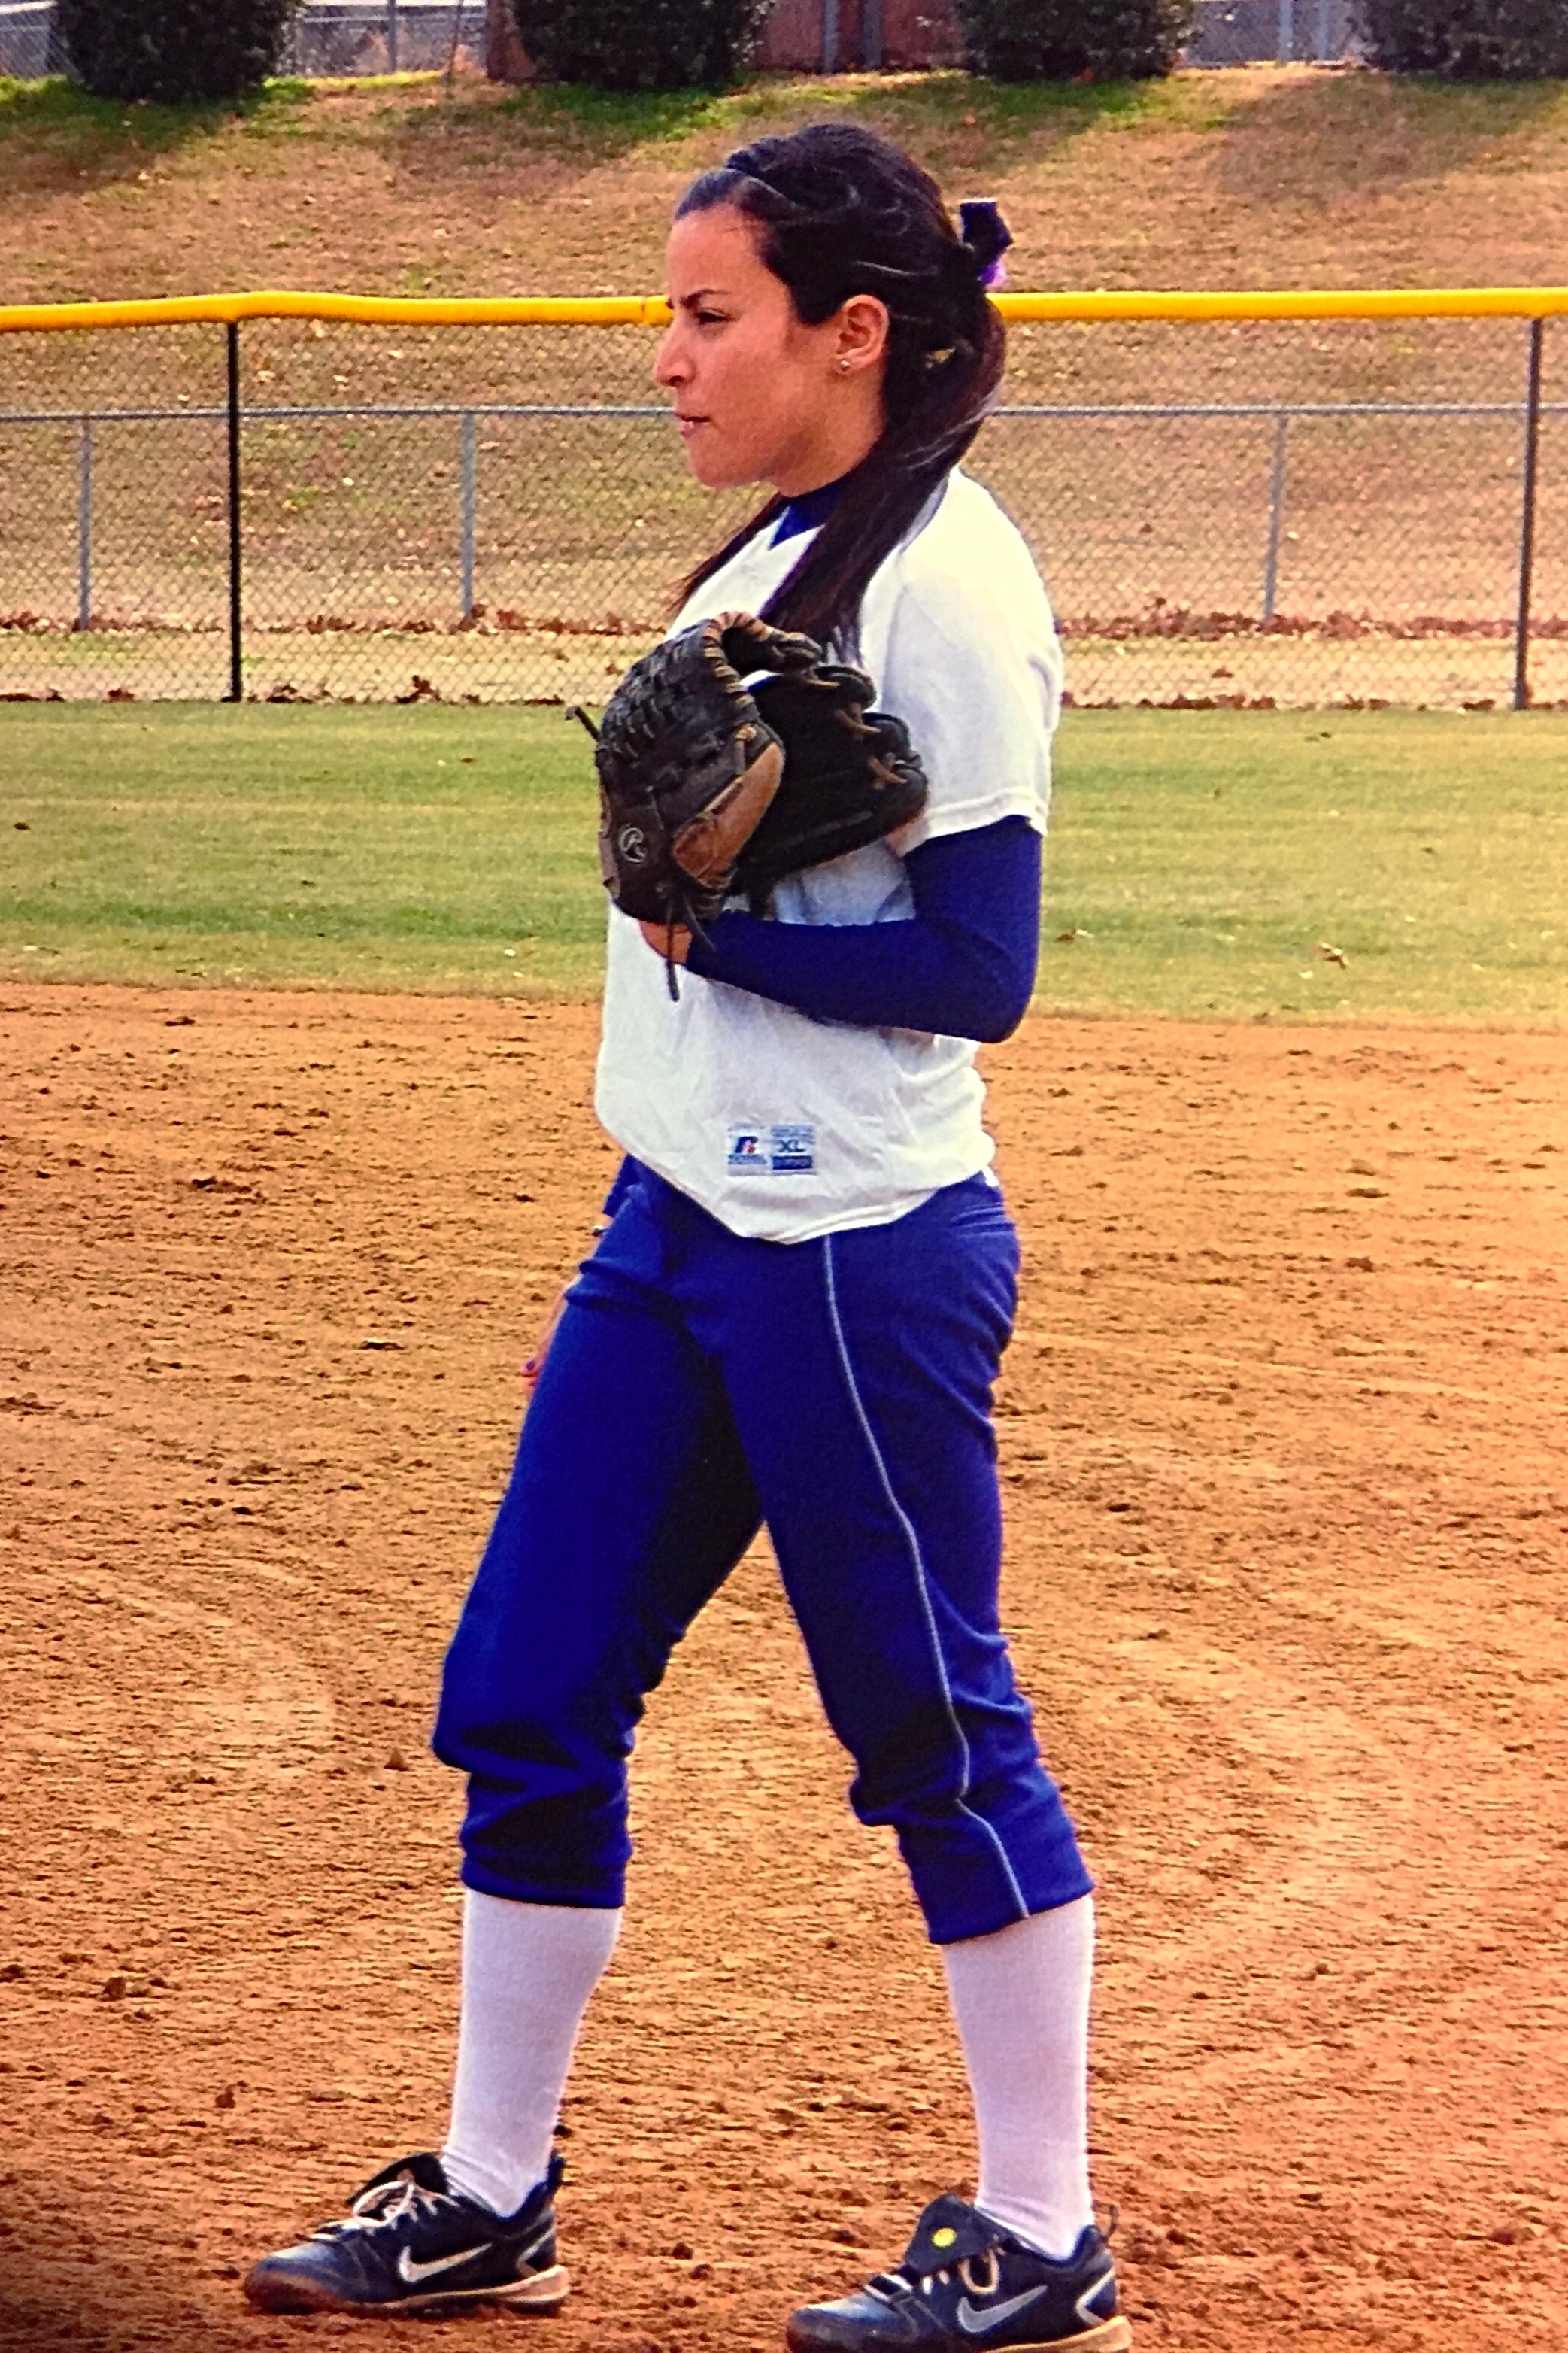 Awaiting for the play as an Alcorn State University softball player. O'Leary fielding a play as a high school softball infielder. (Photo Credit: Breanna O'Leary)